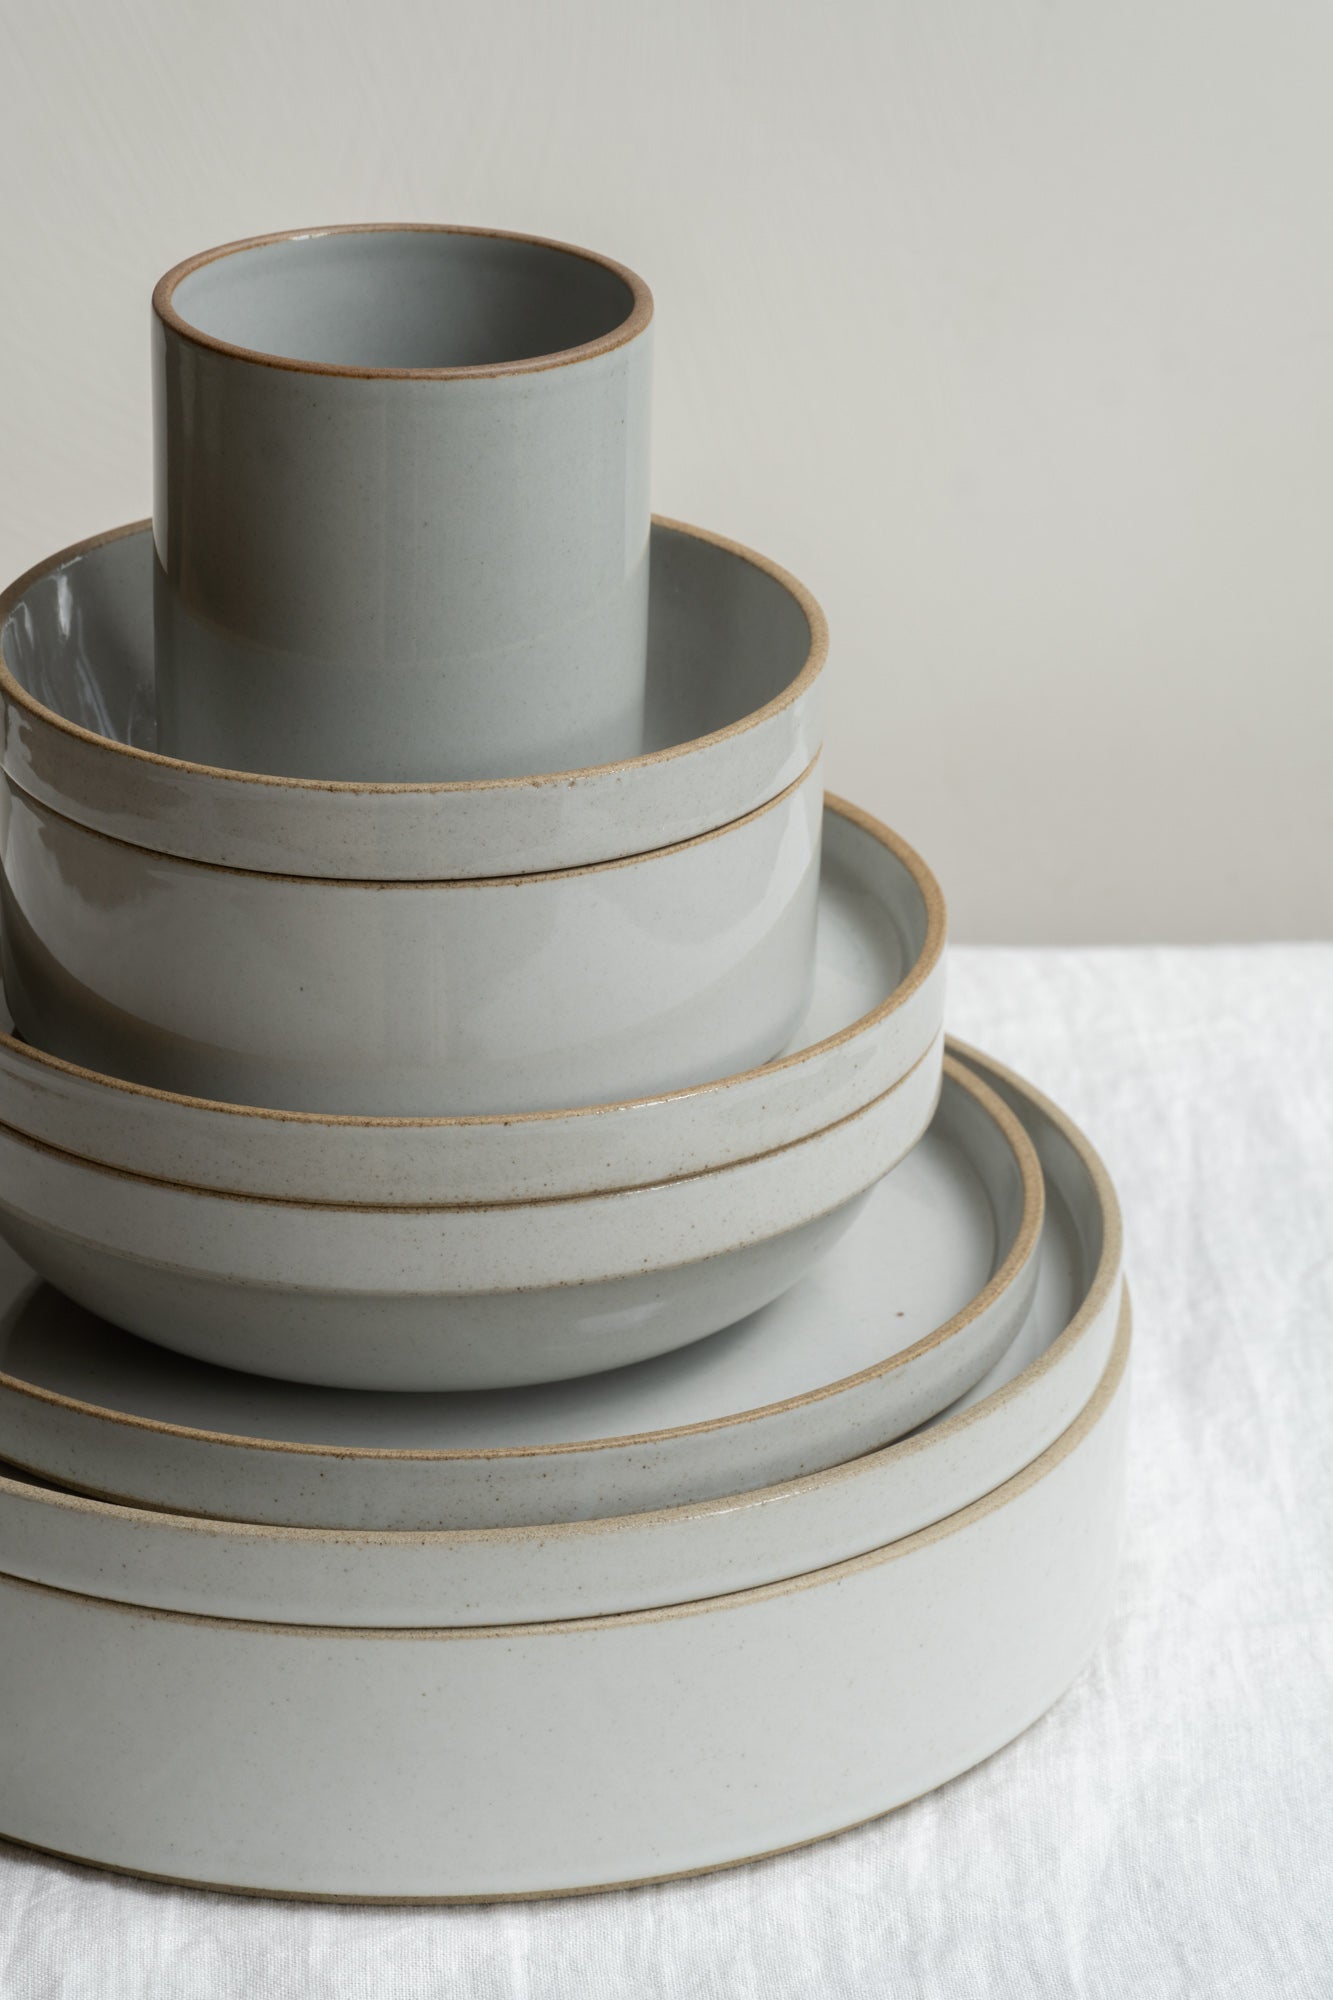 Hasami Porcelain stackable tableware set in grey set on white linen table cloth.